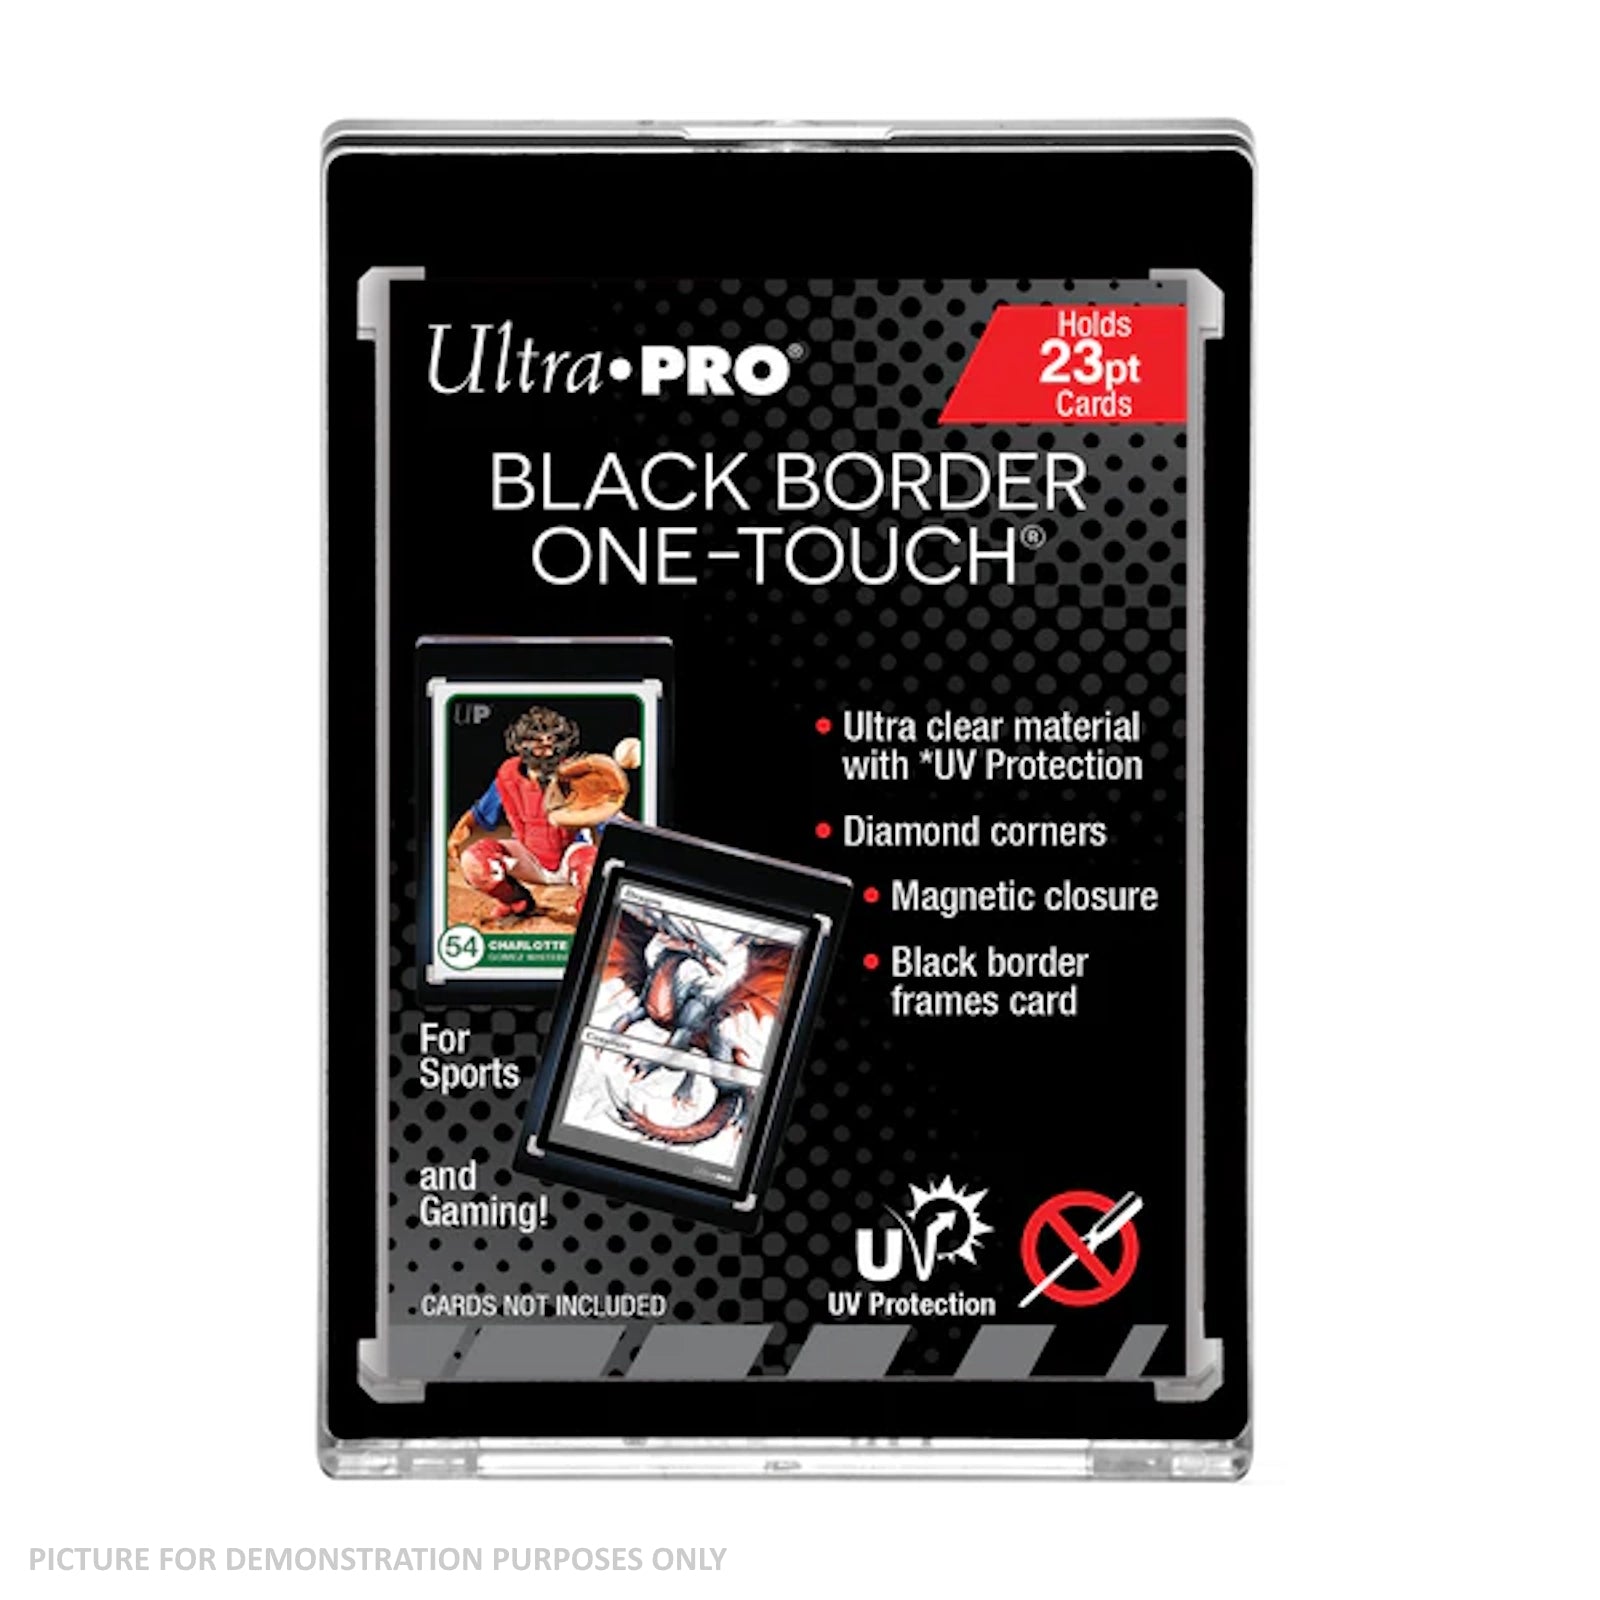 Ultra Pro One-Touch 23pt - Black Border